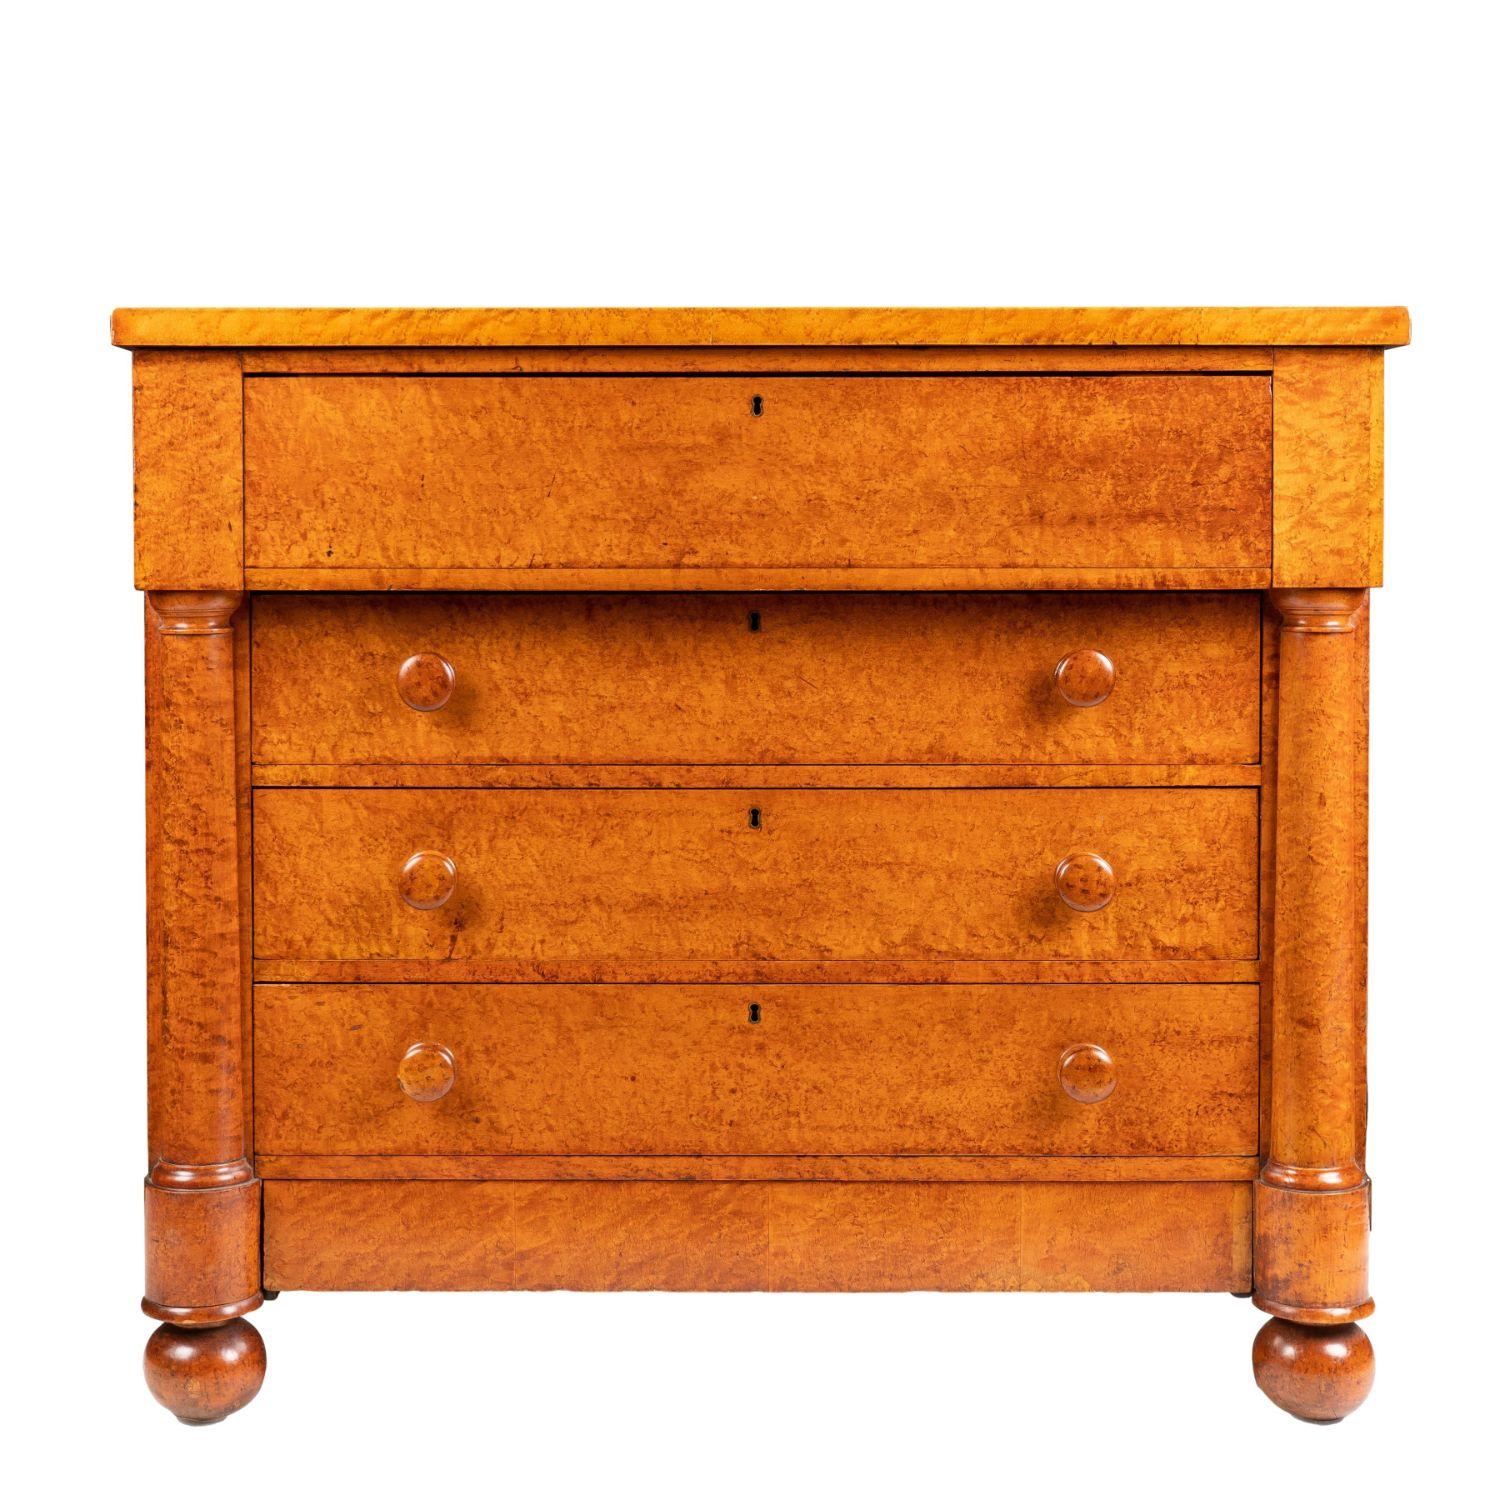 Neoclassical American Neoclassic Bird's Eye Maple Four Drawer Chest, 1820 For Sale